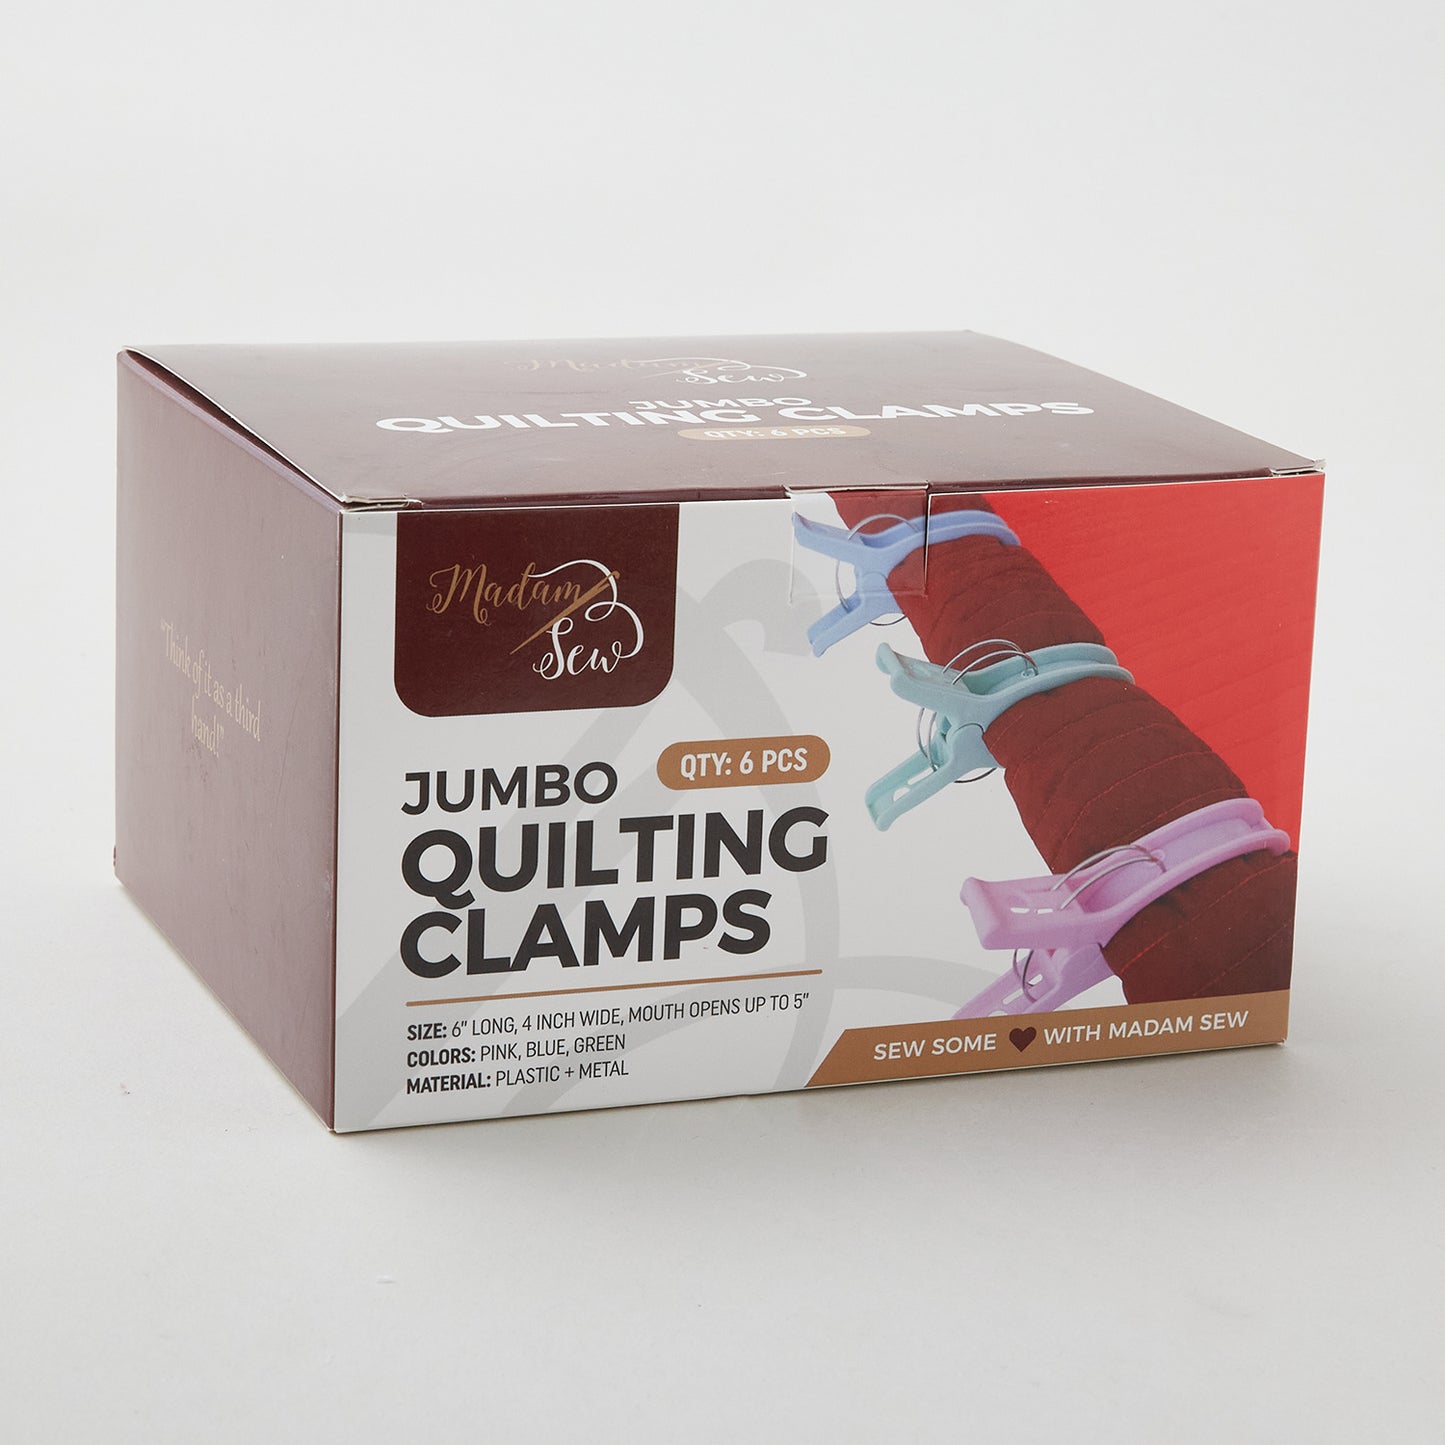 XL Jumbo Quilting Clamps 6pk Alternative View #3